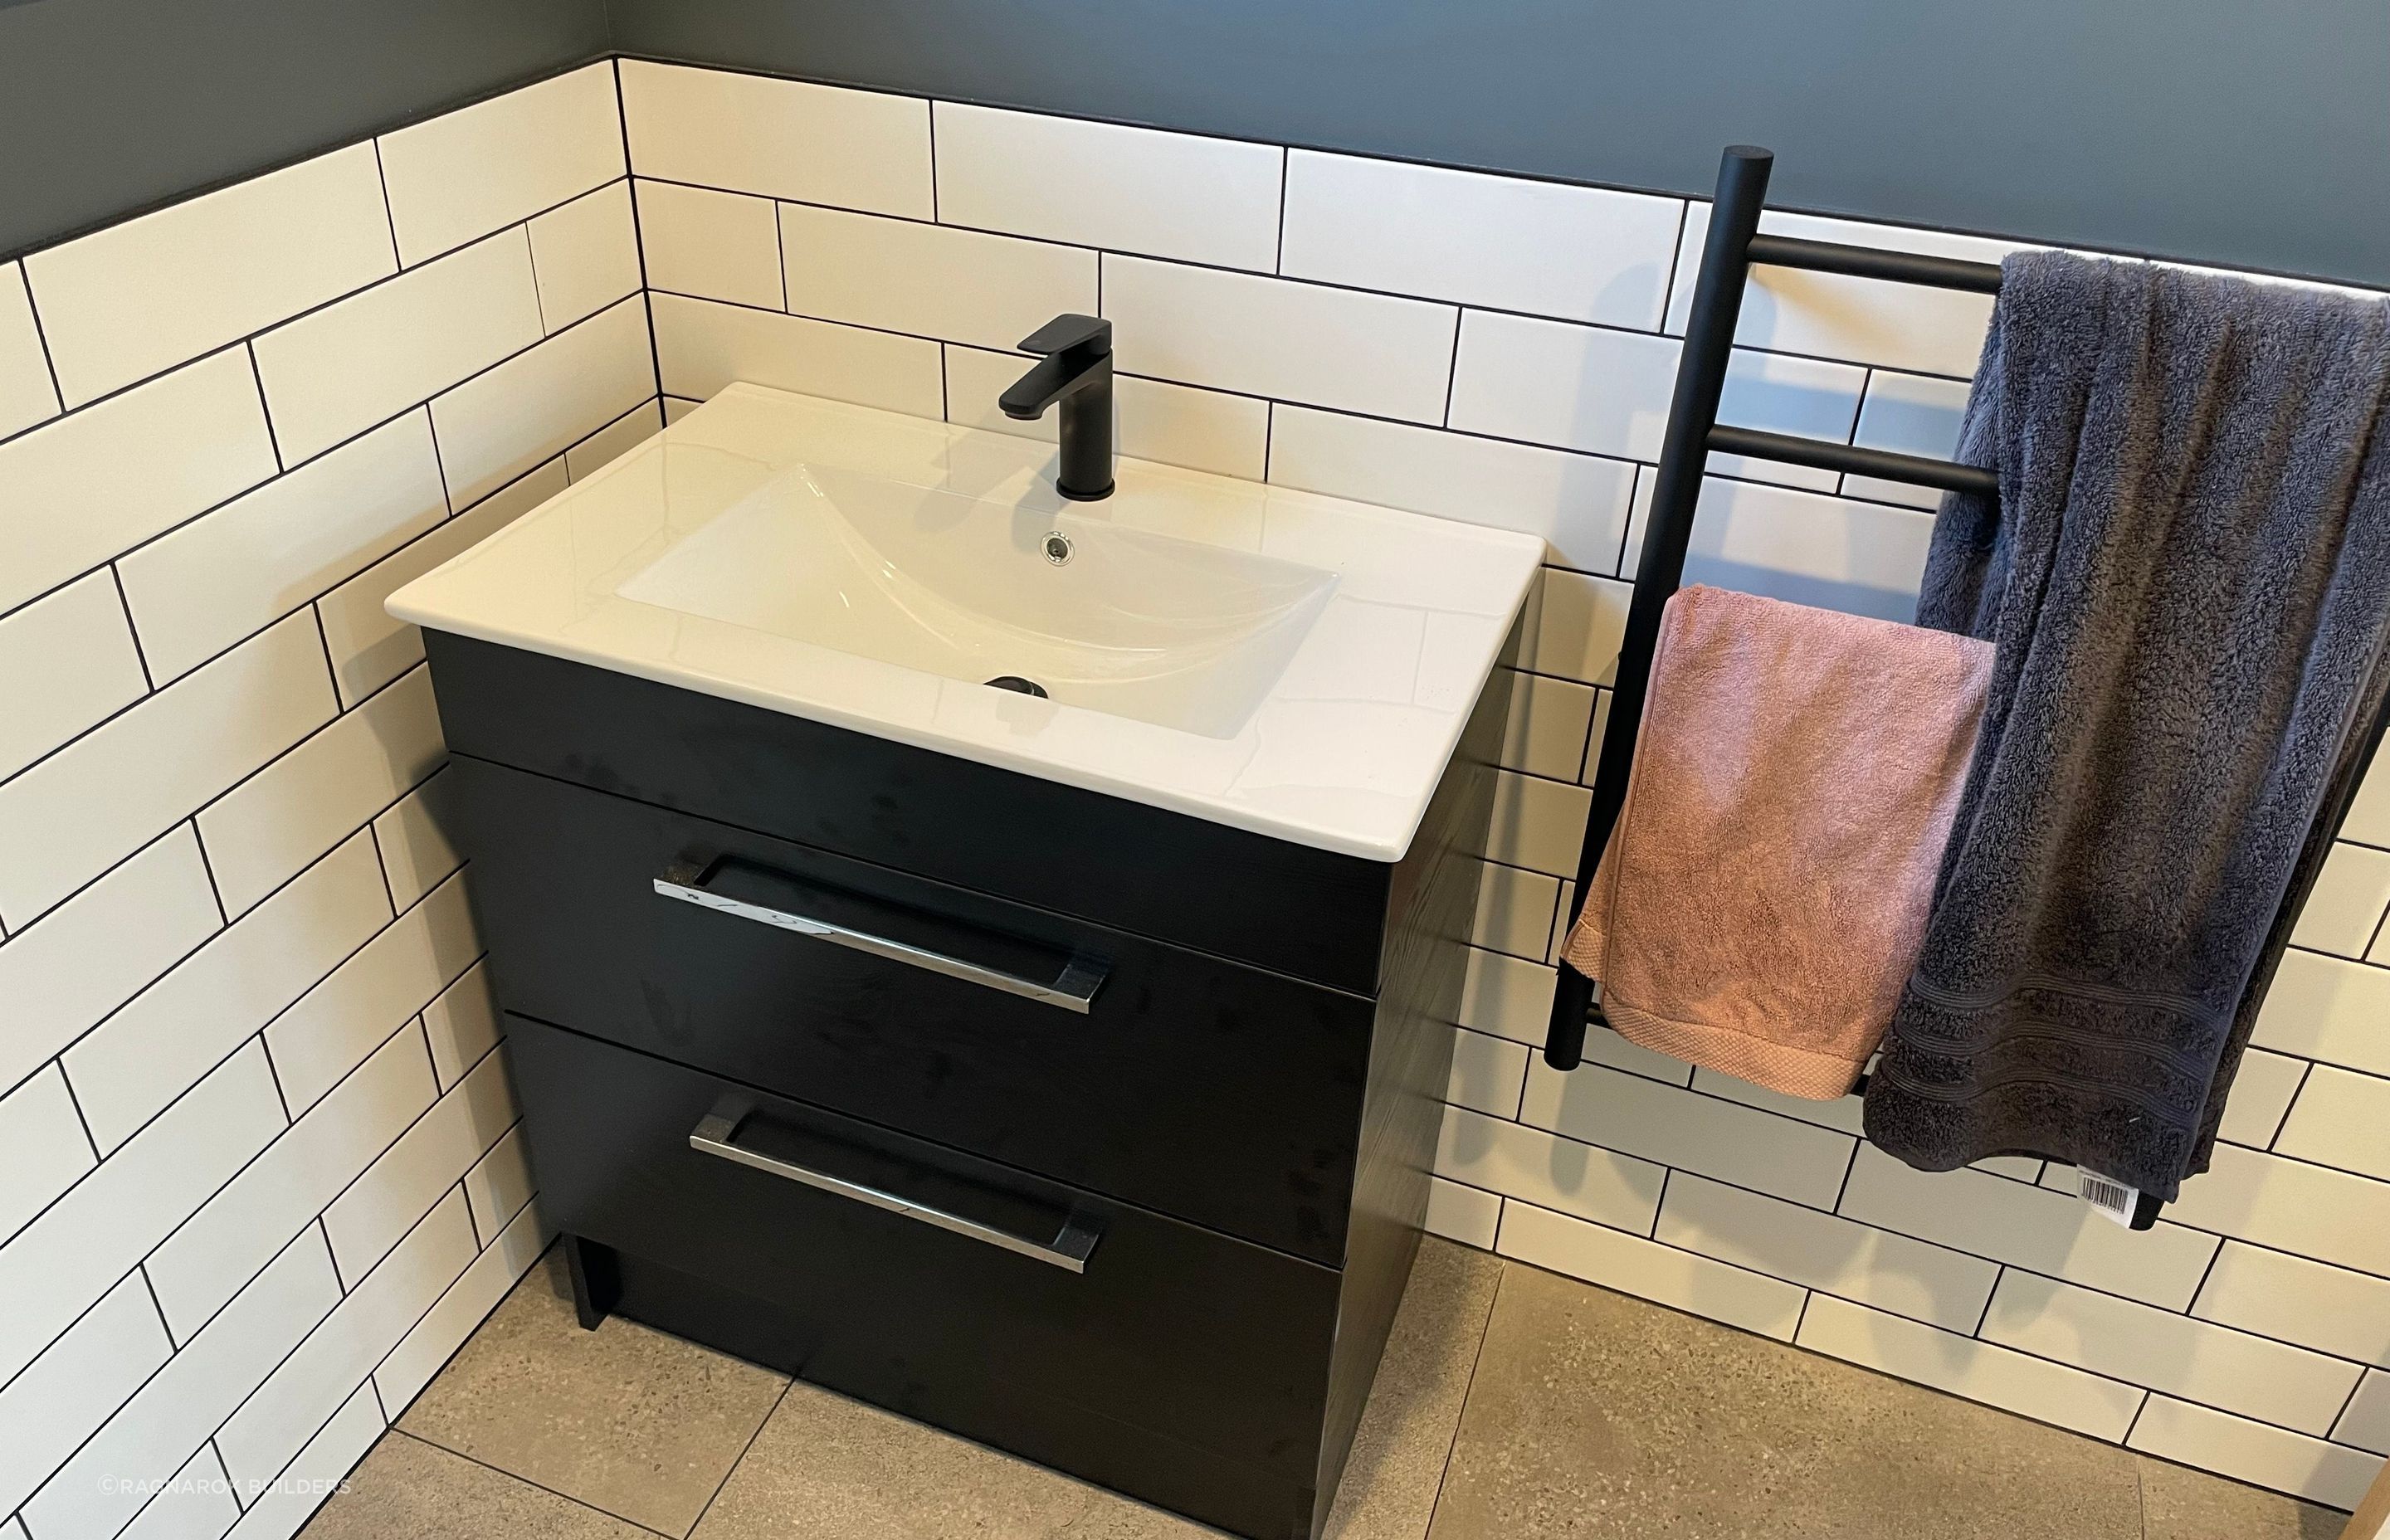 Black and white vanity with matching tiles and towel rail.